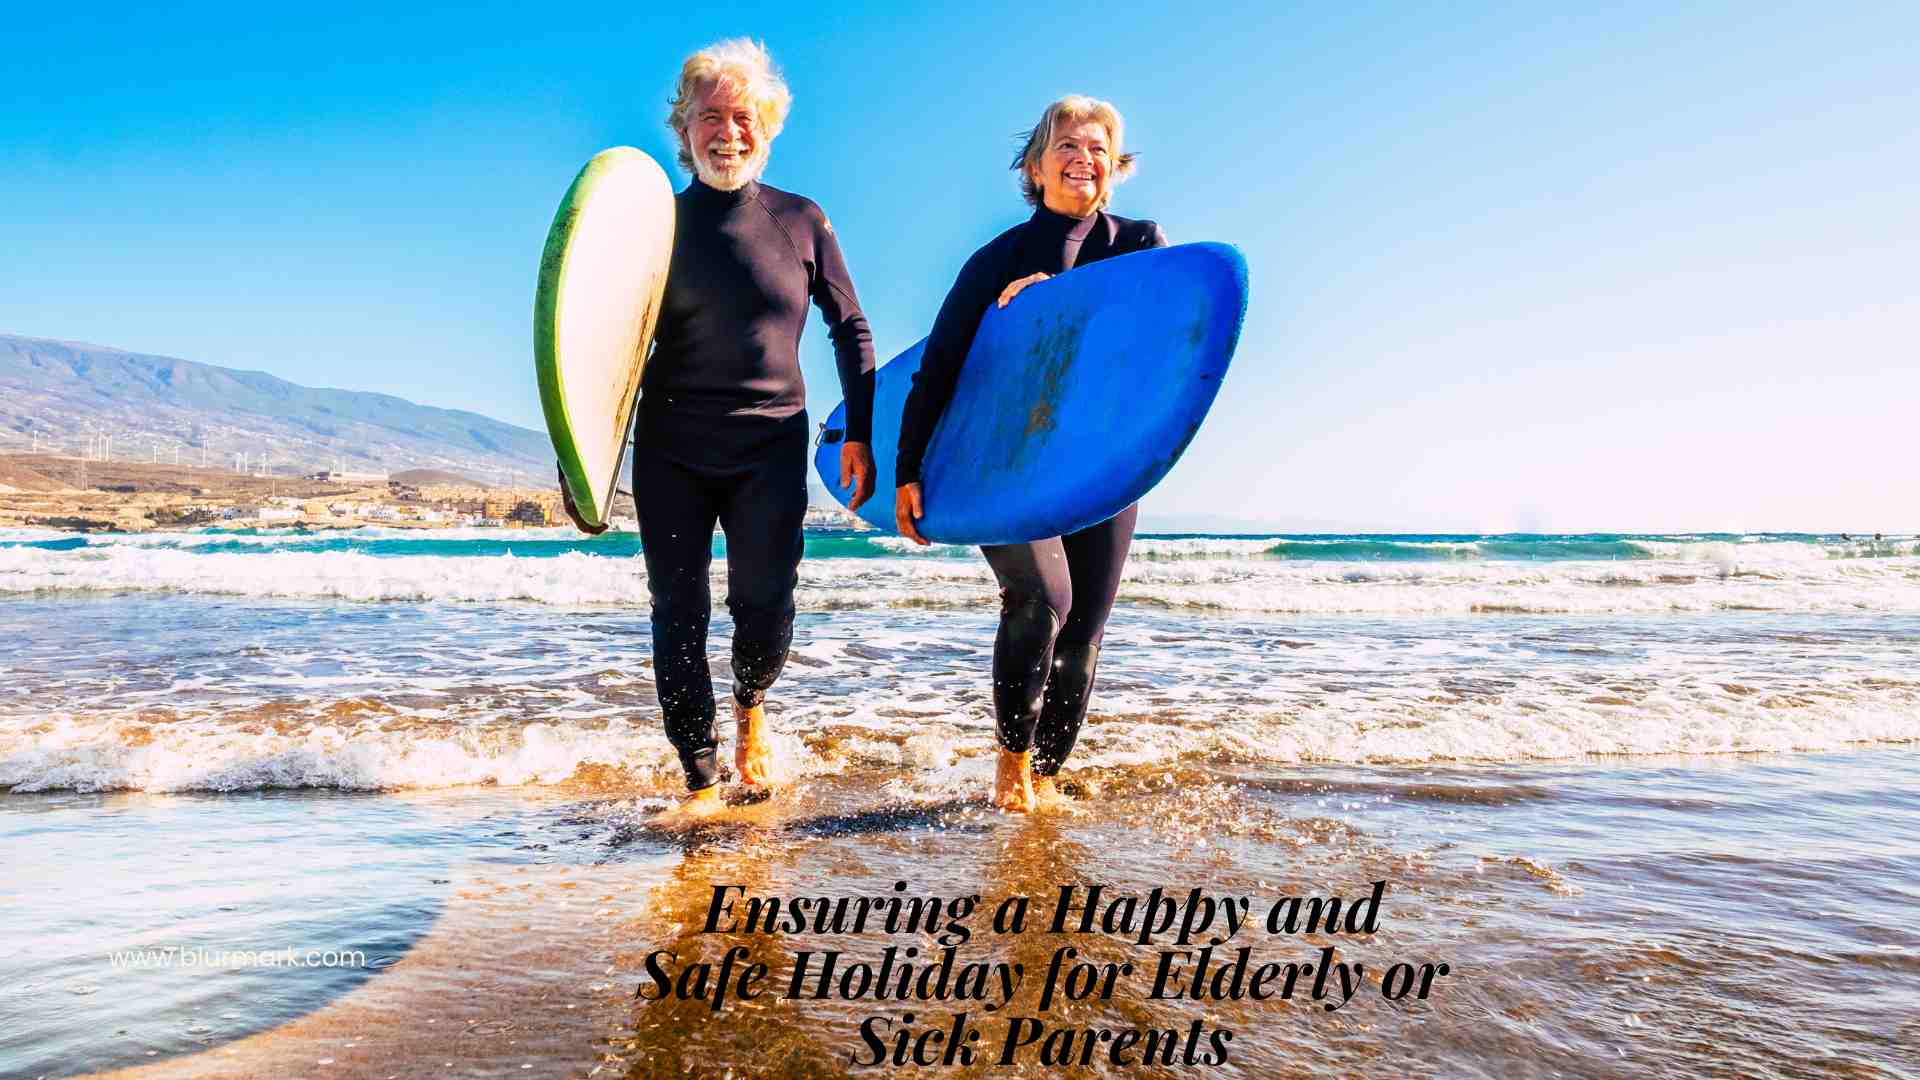 Ensuring a Happy and Safe Holiday for Elderly or Sick Parents